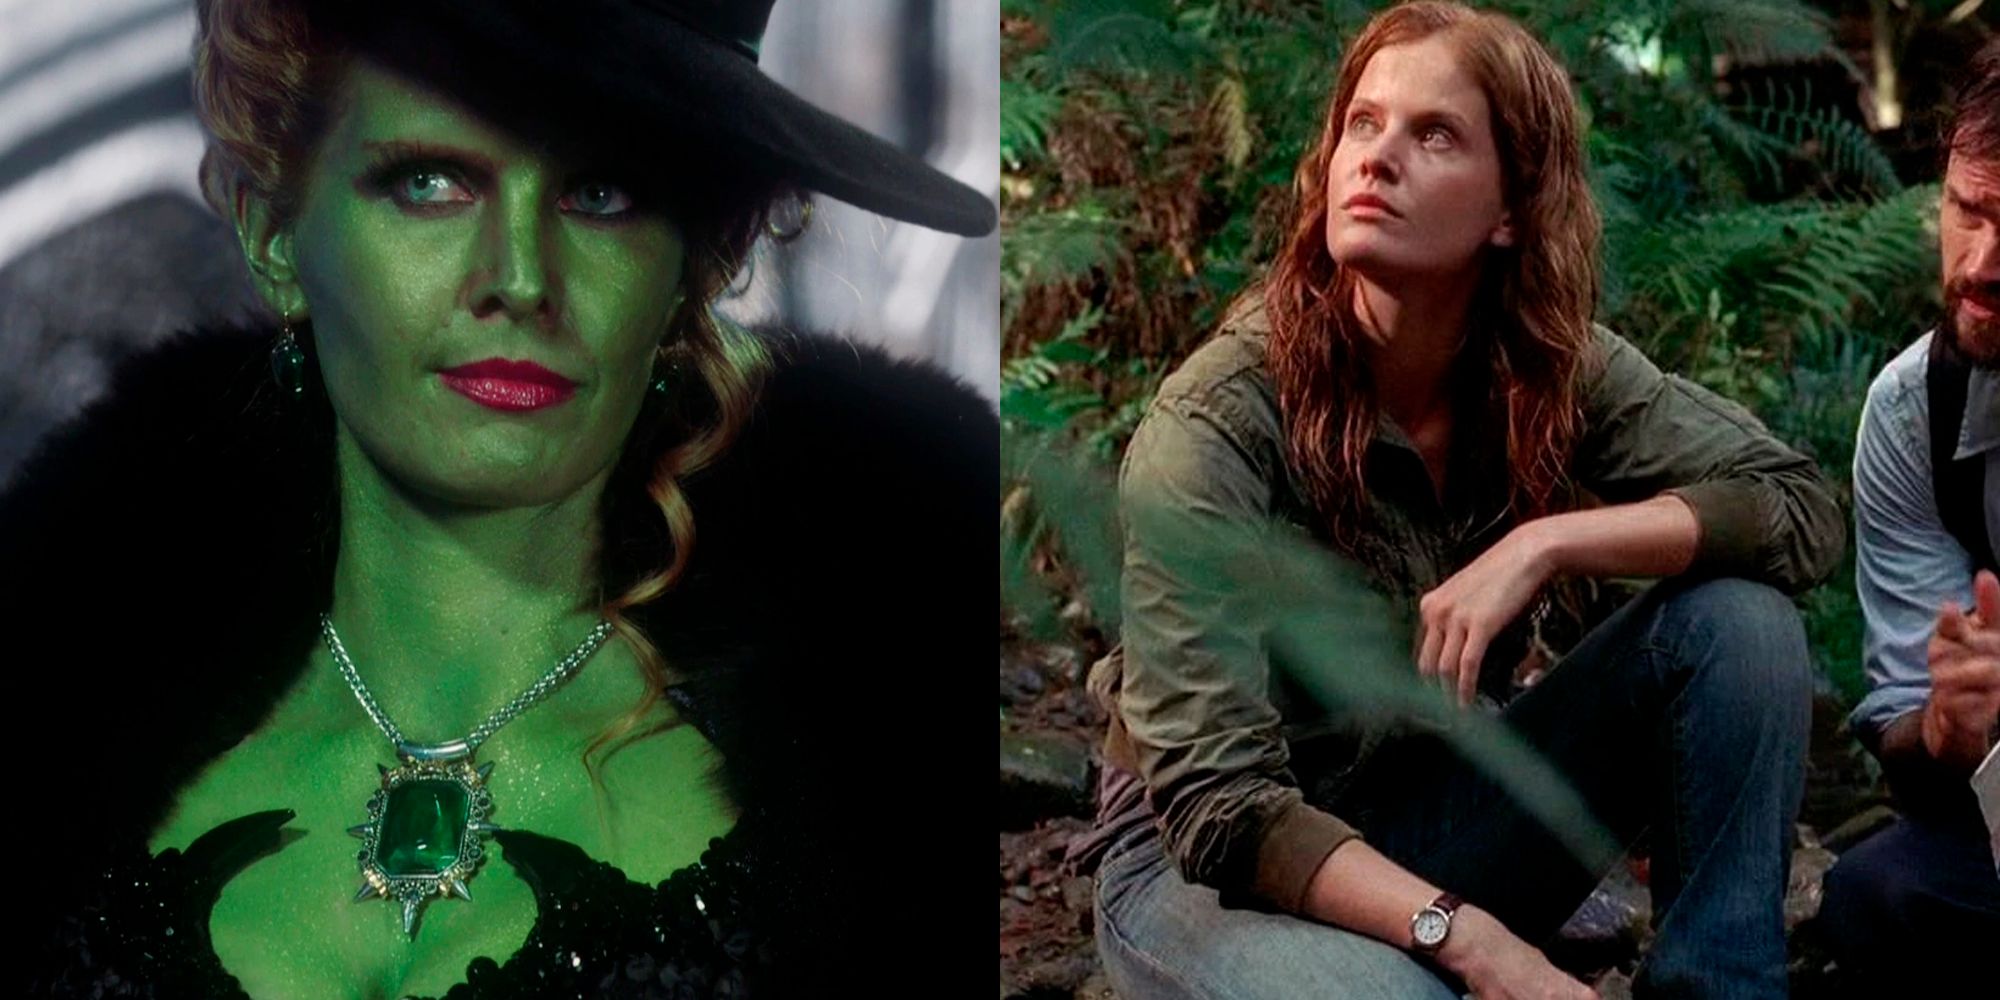 Rebecca Mader plays Zelena and Charlotte in Once Upon a Time and Lost